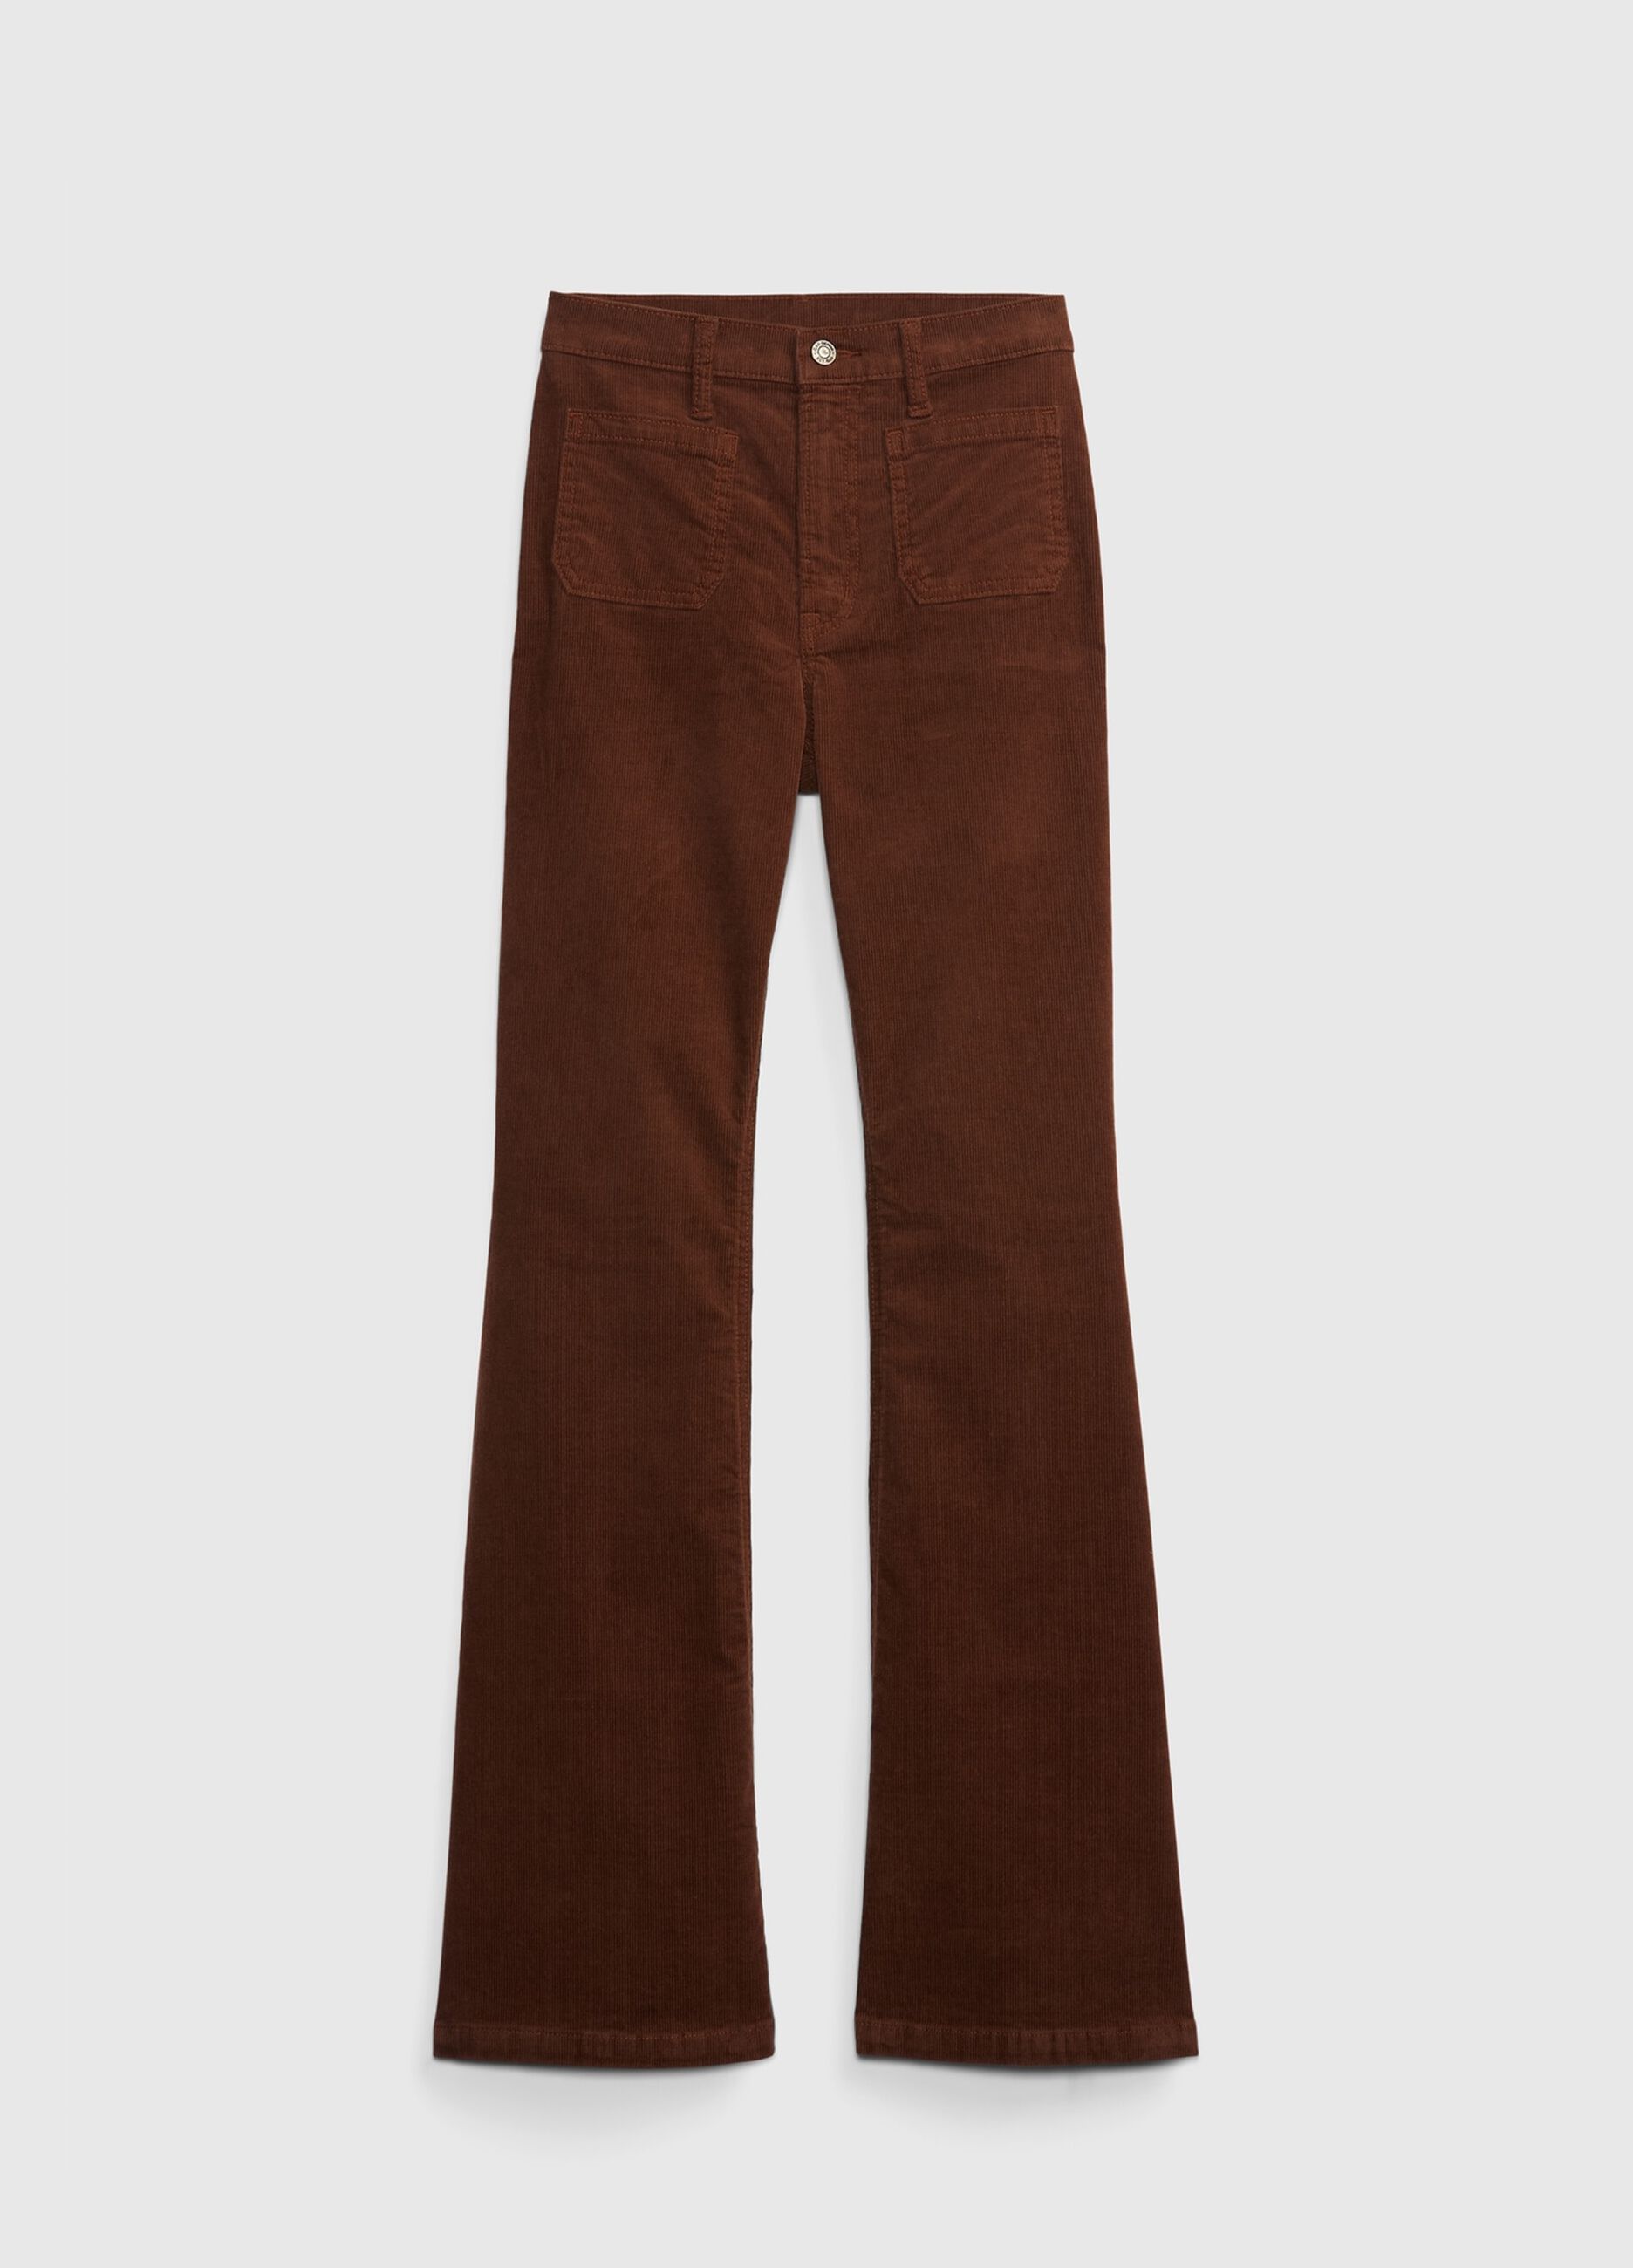 Jeans flare fit in corduroy